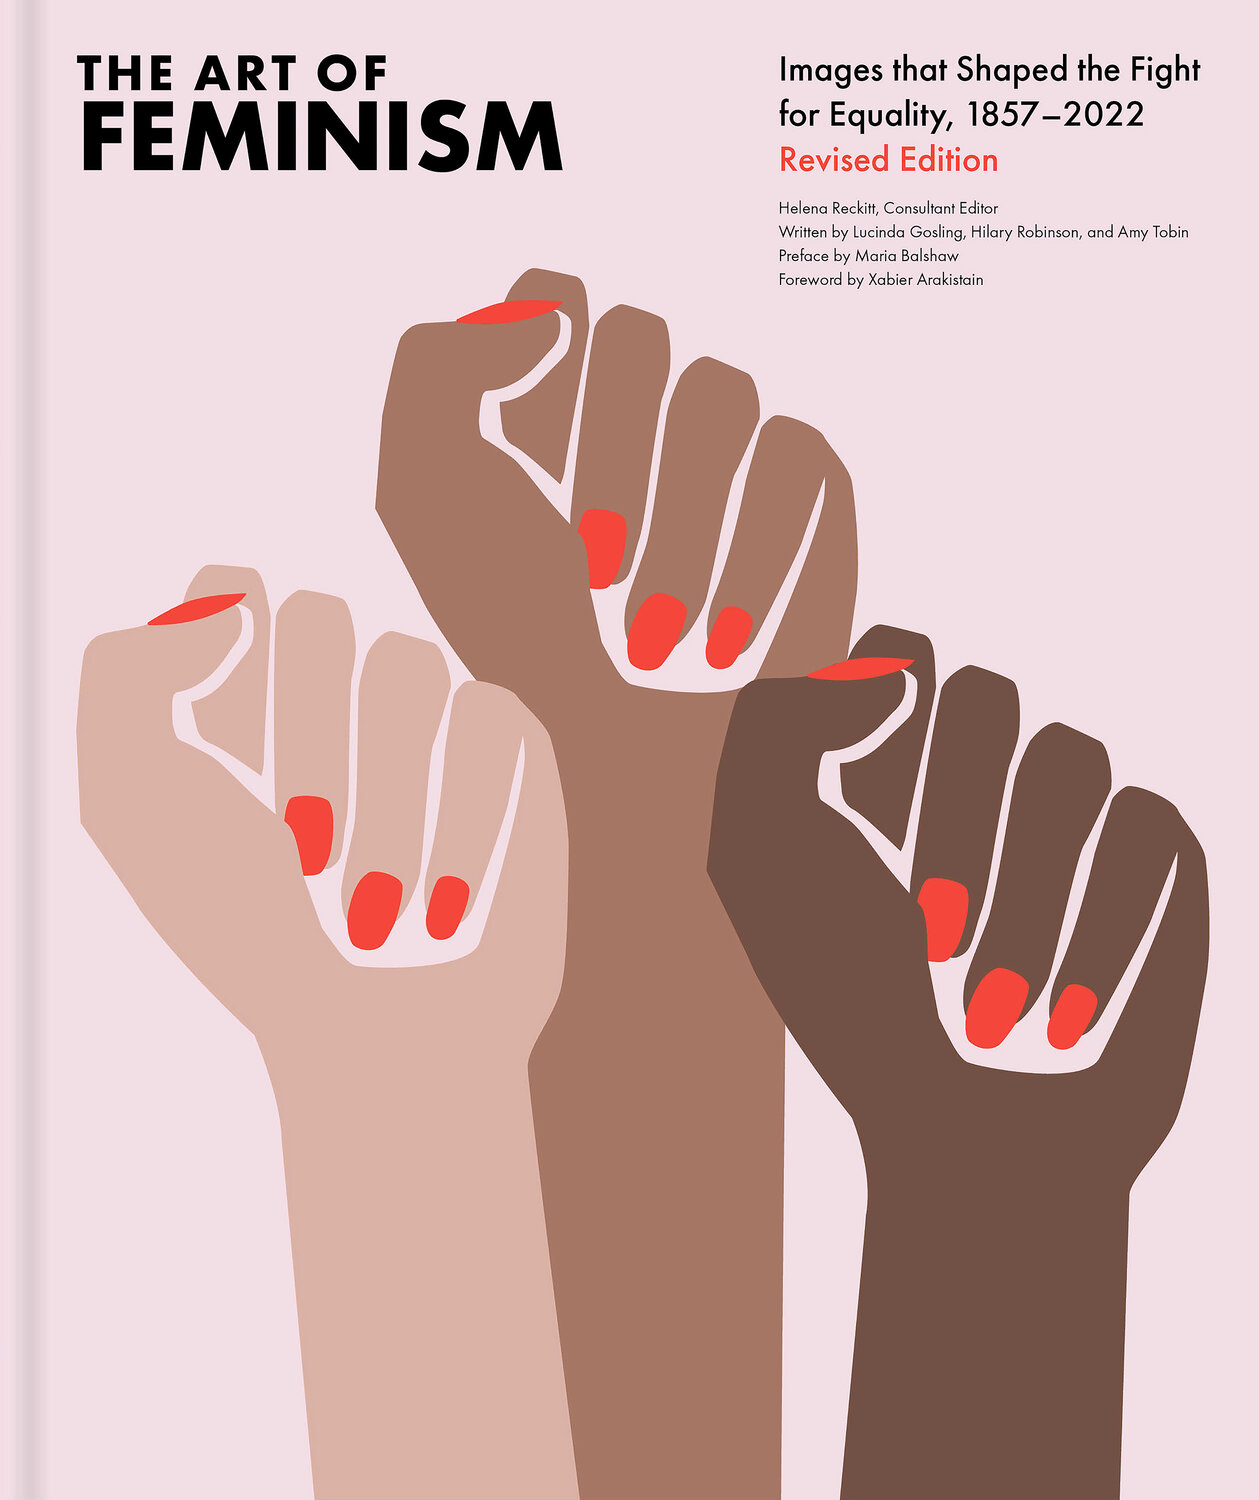 “The Art of Feminism,” a collection of art, illustration, photography and graphic design that spans the feminist aesthetic over two centuries.